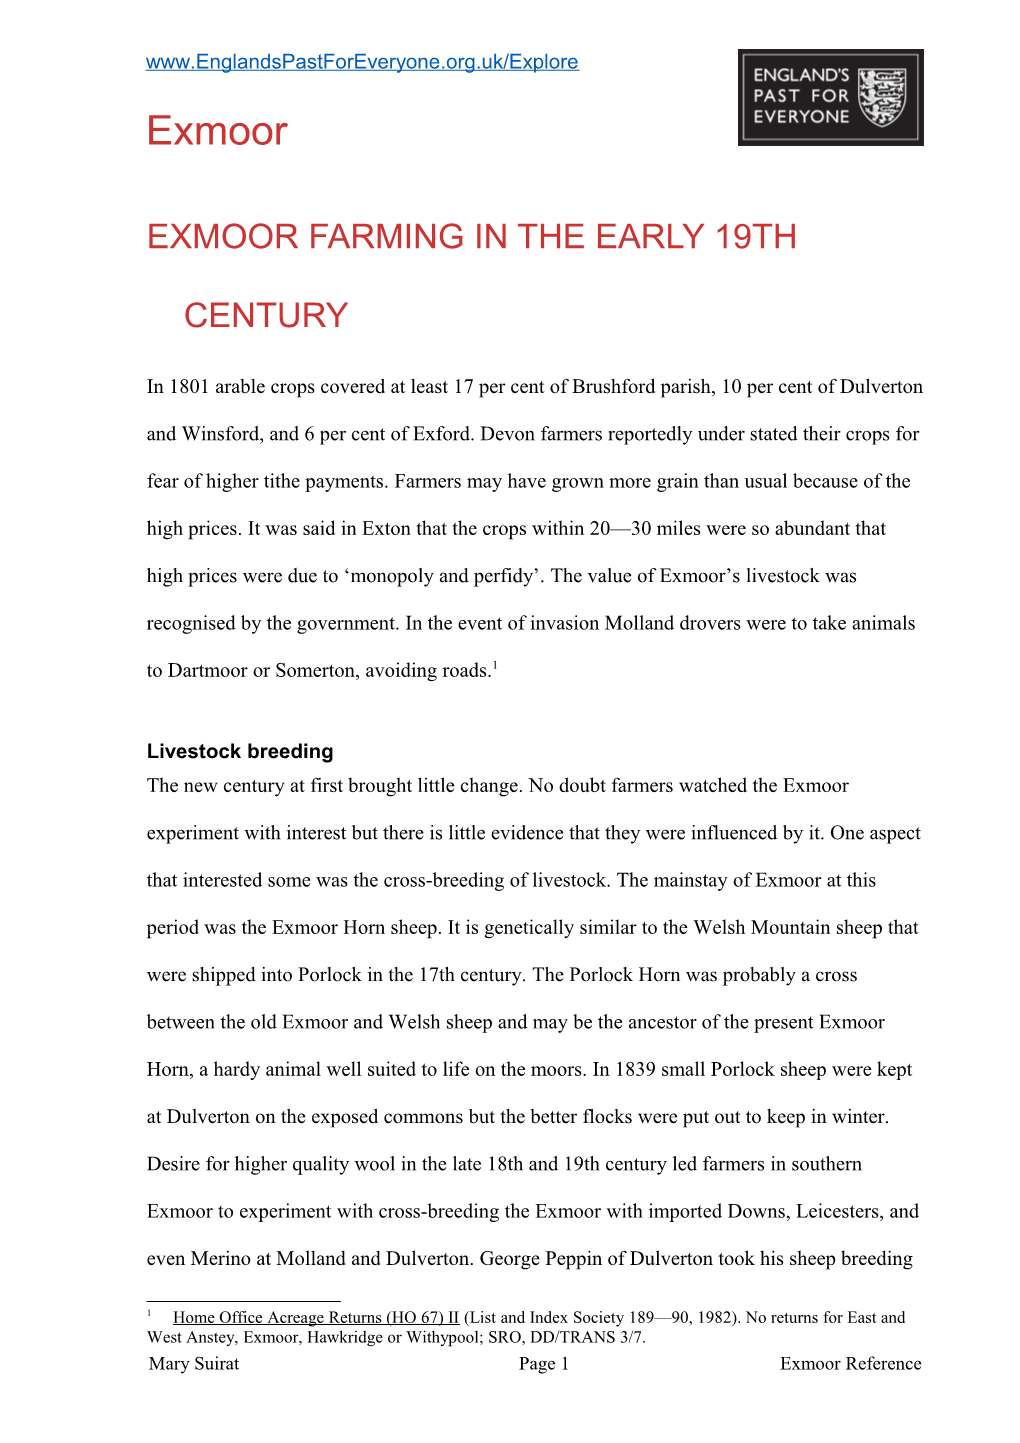 Exmoor Farming in the Early 19Th Century